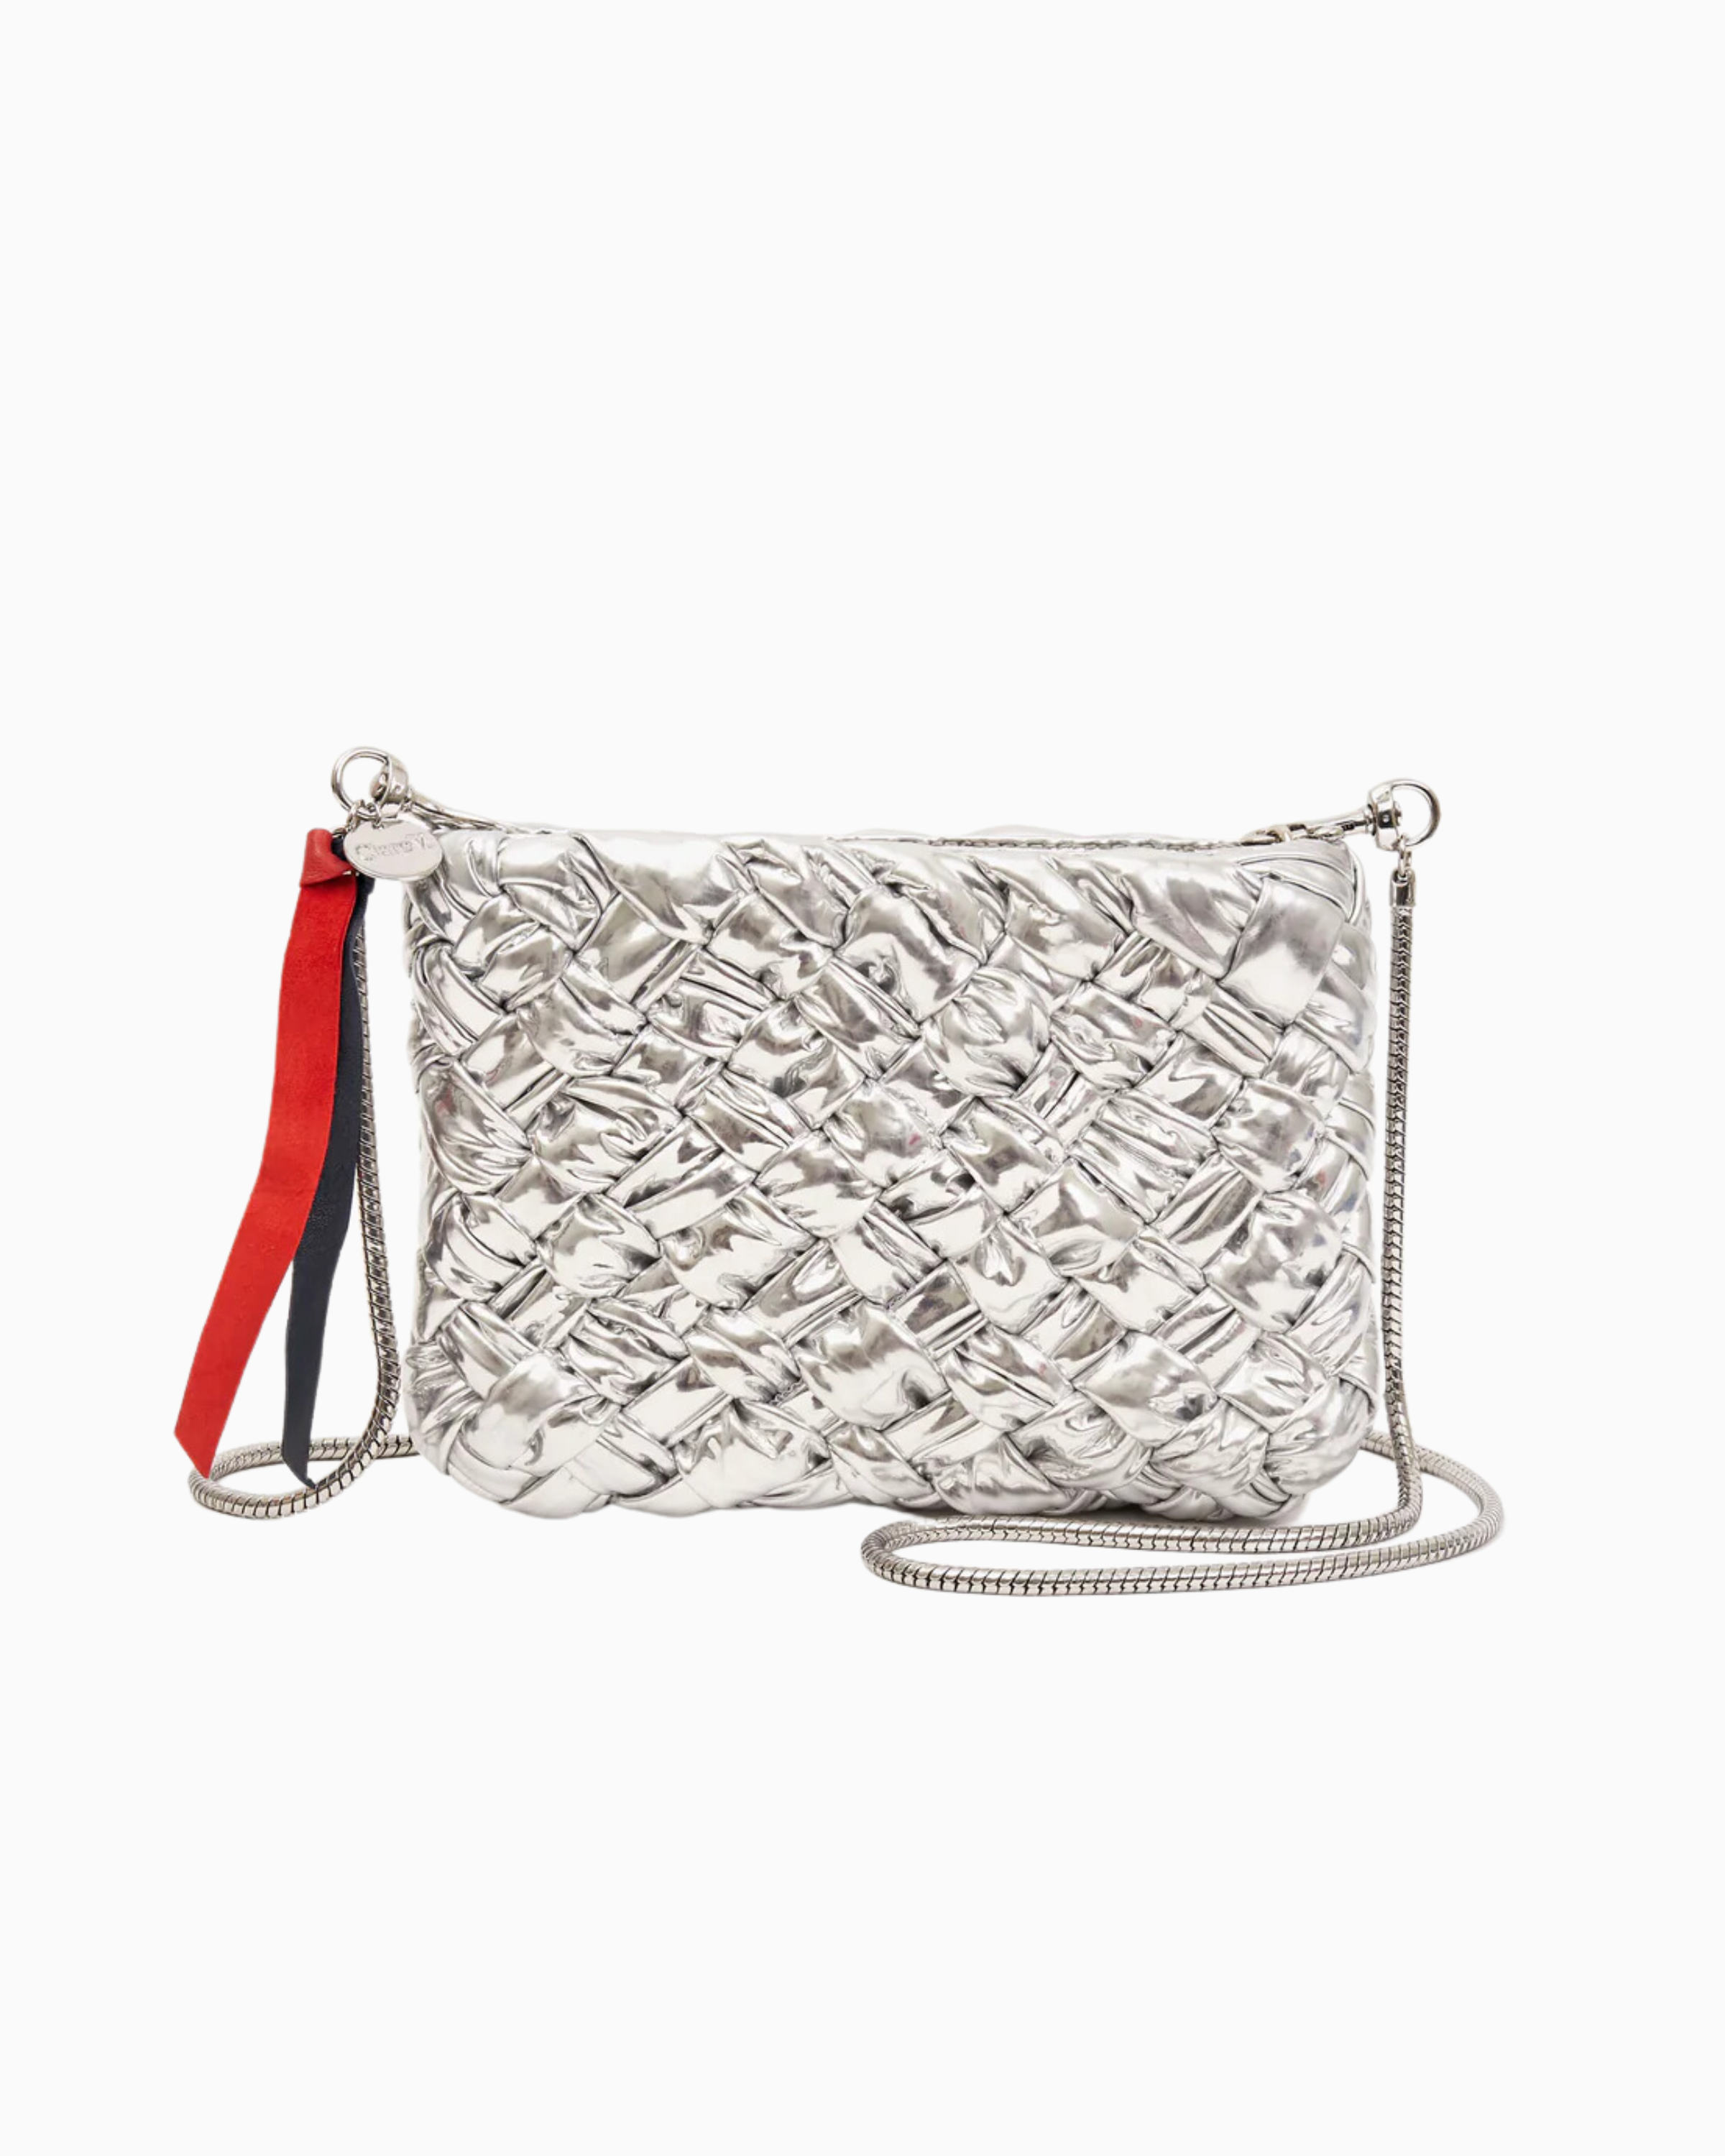 Clare V. Estelle Bag in Puffy Woven Silver